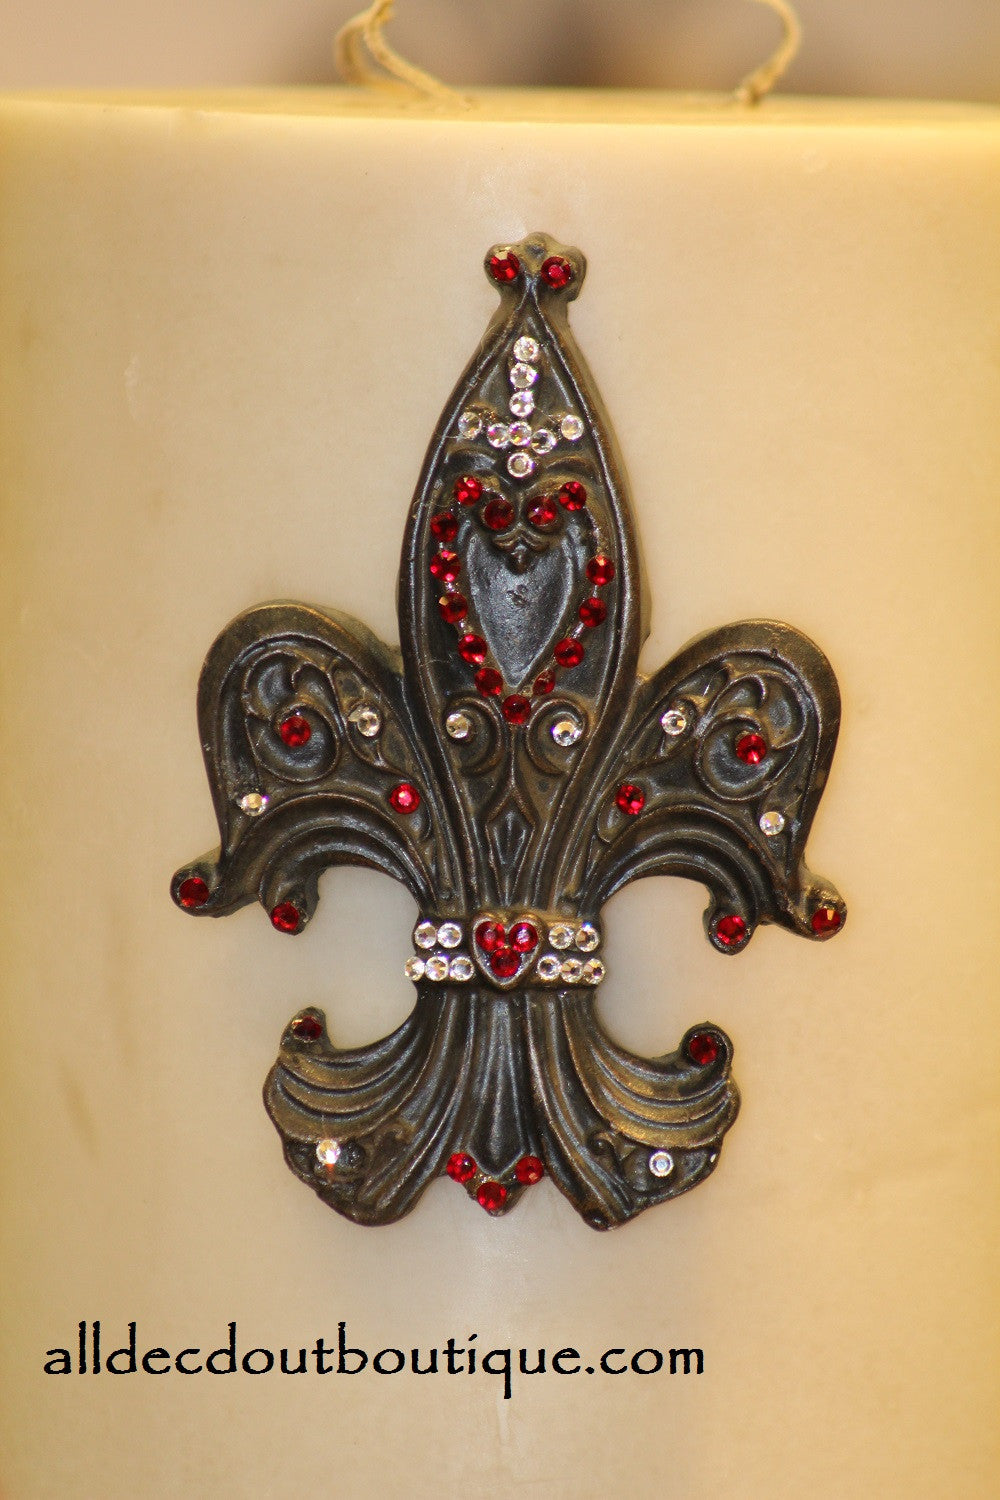 DECORATIVE CANDLE PIN EMBELLISHED Rose Red/Clear Crystals Large Fleur De Lis